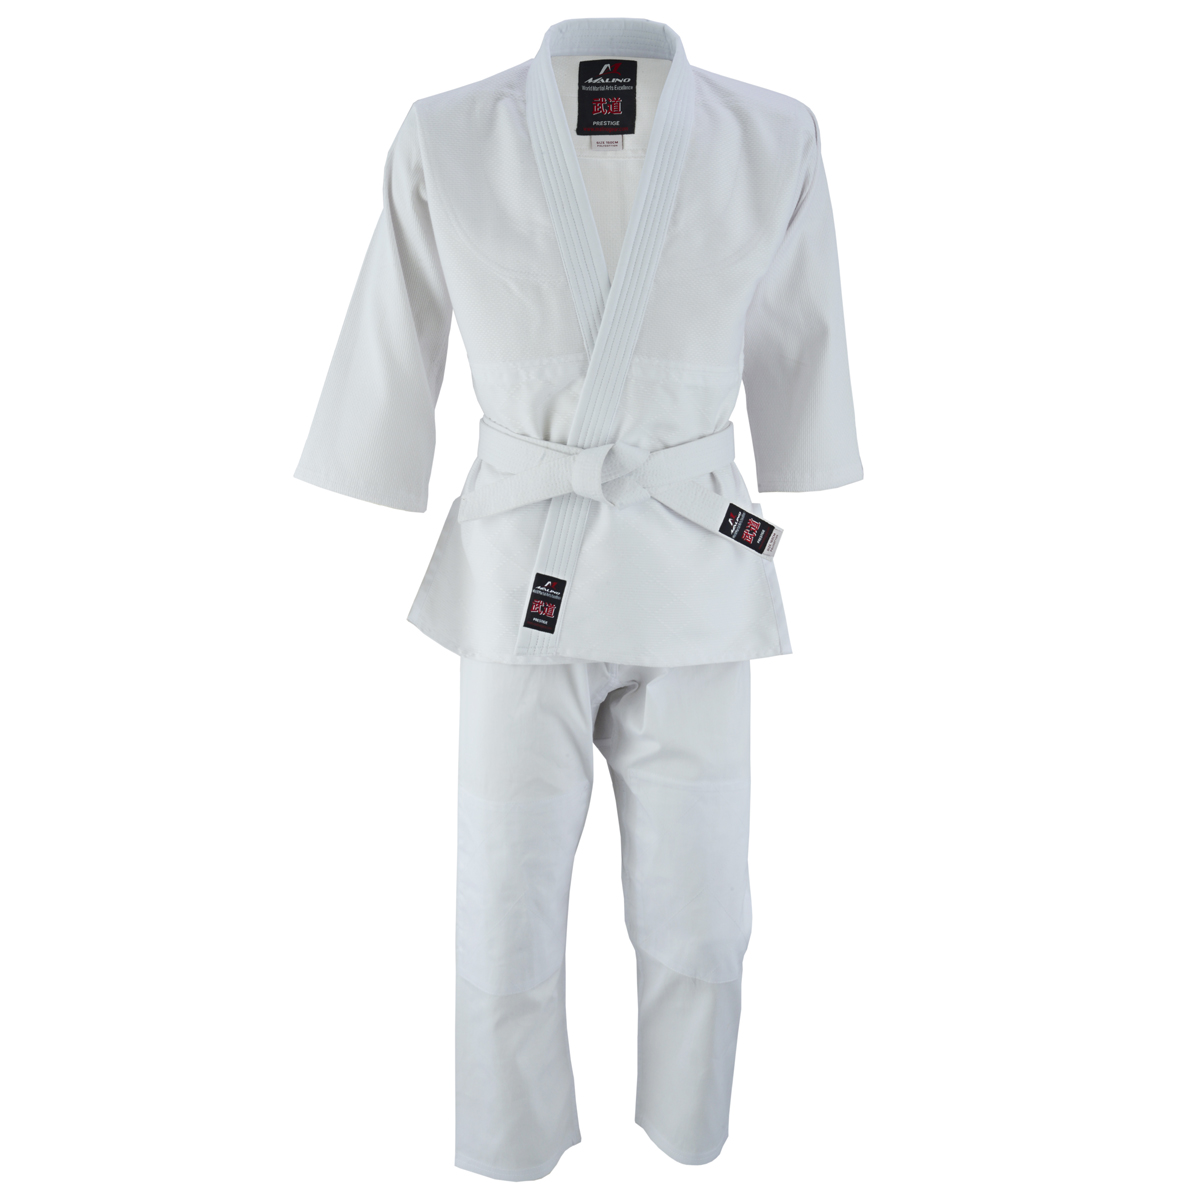 Student Judo Gi Suit Uniform Lightweight for Kids Sizes Poly-Cotton 350g White 